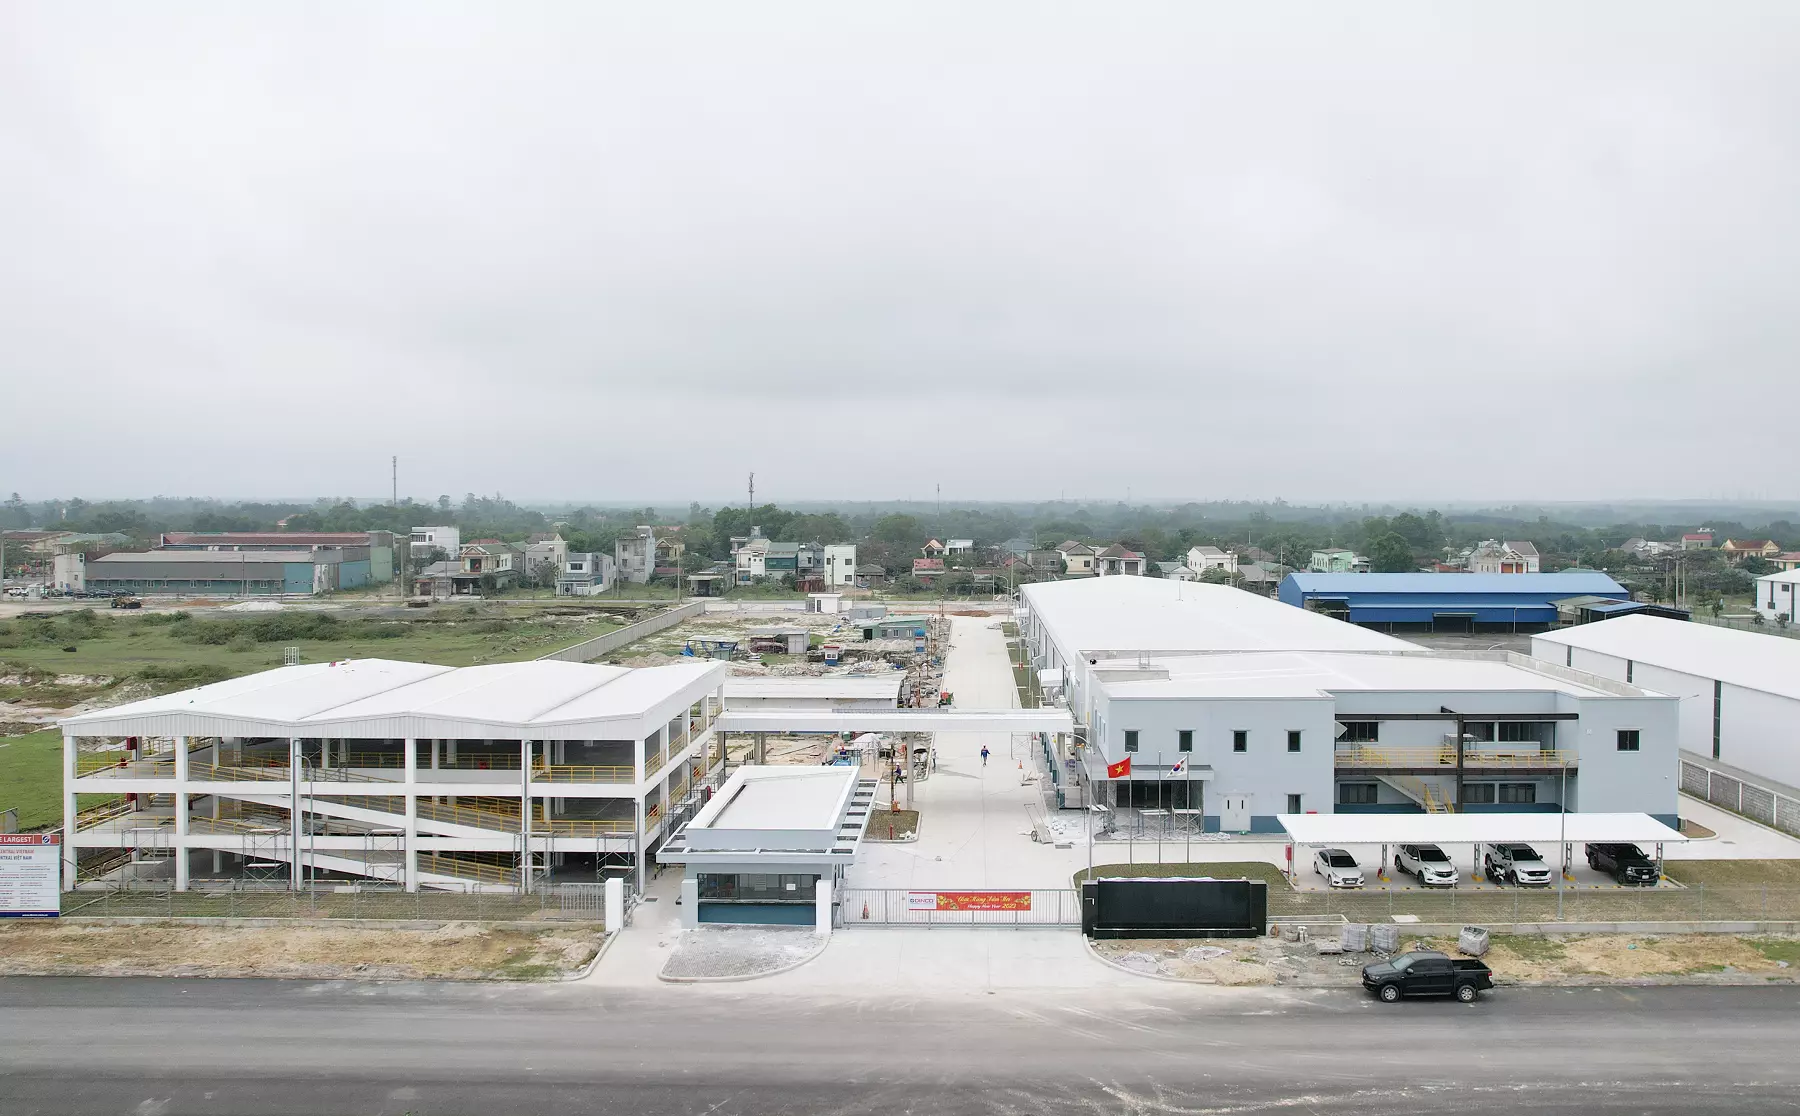 IMAGES OF SANGSHIN CENTRAL VIETNAM PROJECT AFTER 7 MONTHS OF CONSTRUCTION